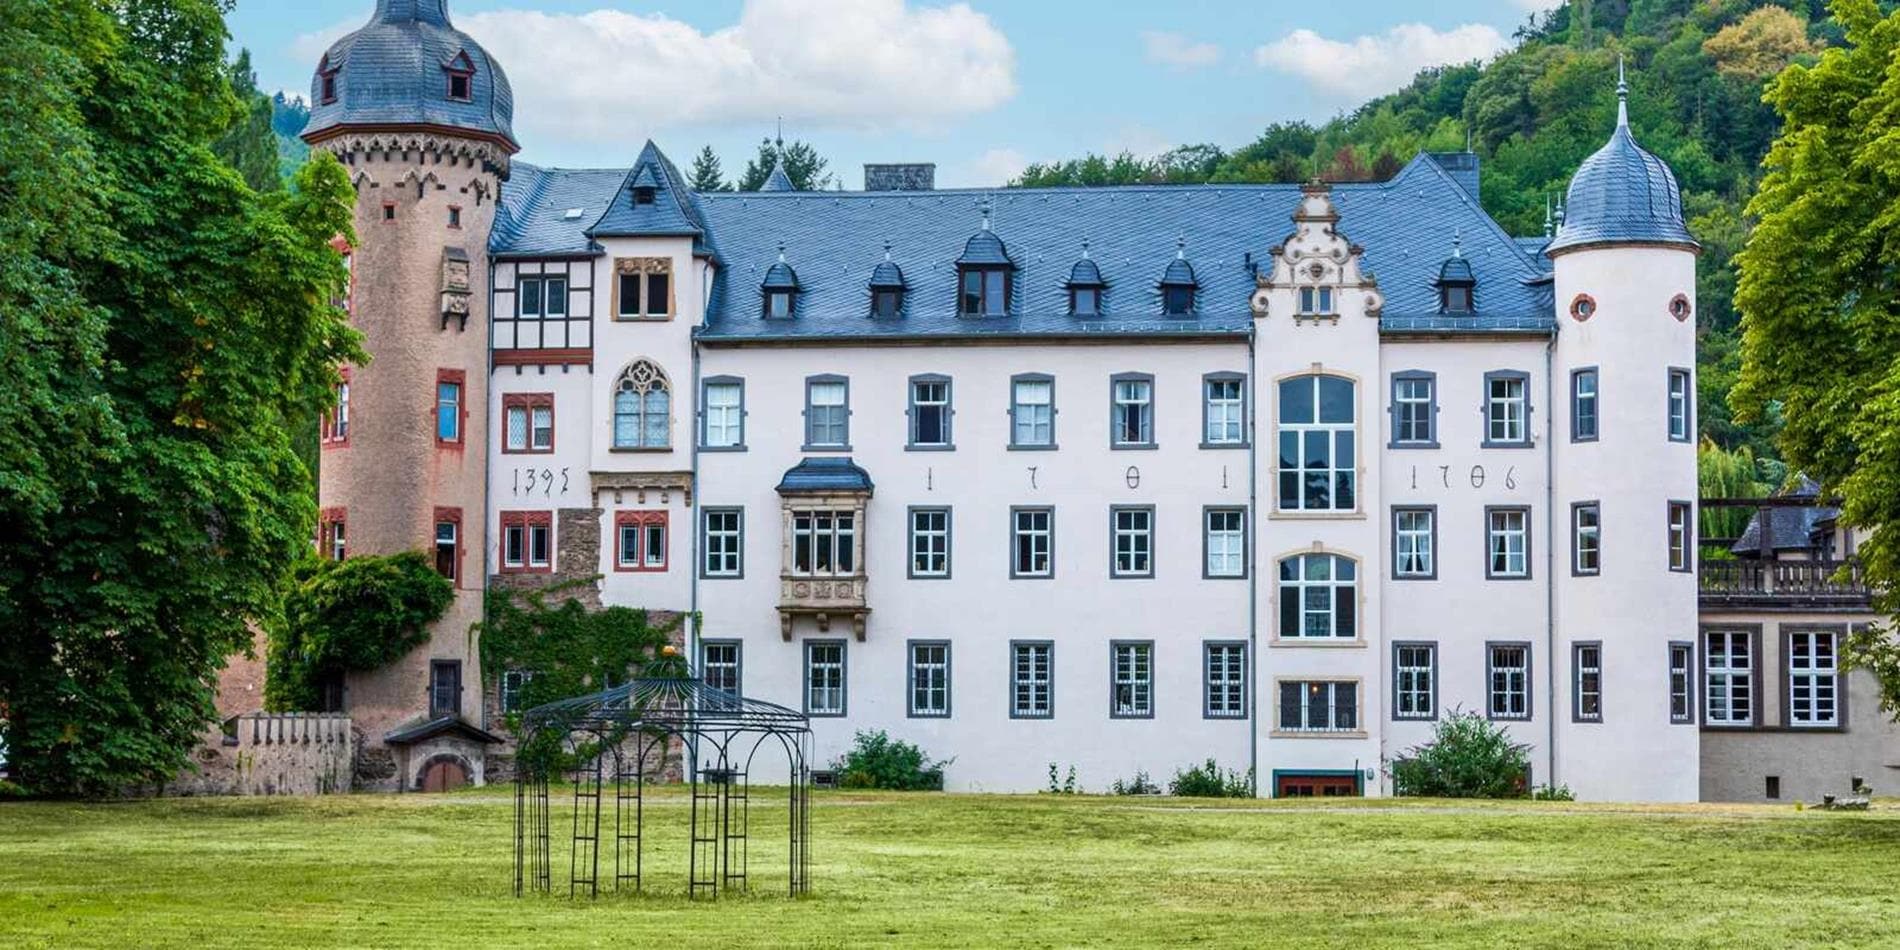 Exterior view of Nameday Castle, Germany